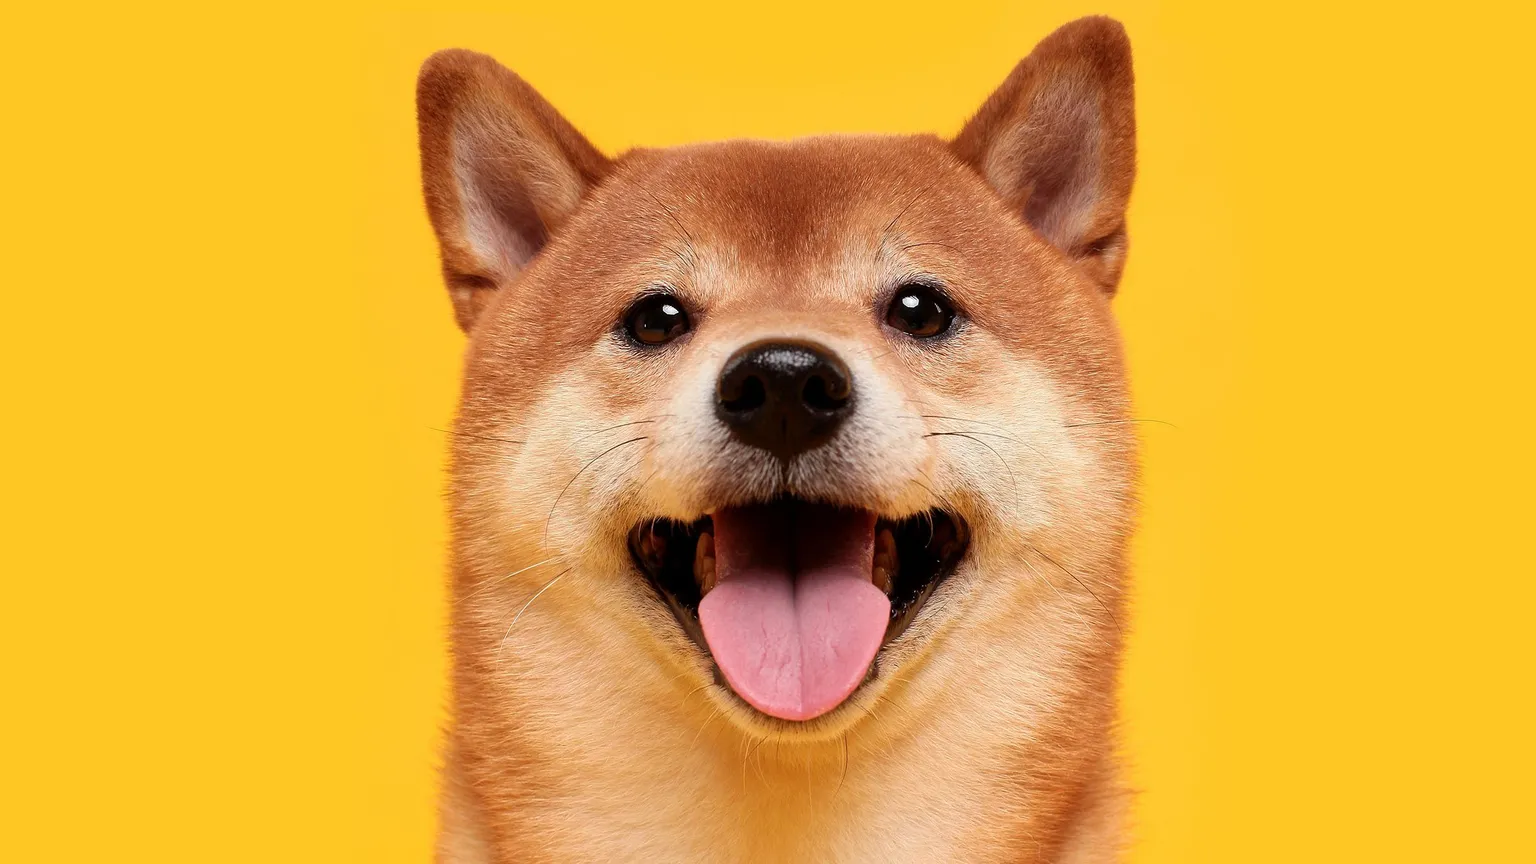 Only one of the top thirty cryptocurrencies by market cap posted notable gains: Dogecoin rival Shiba Inu (SHIB), up 14.7% for the week. Image: Shutterstock